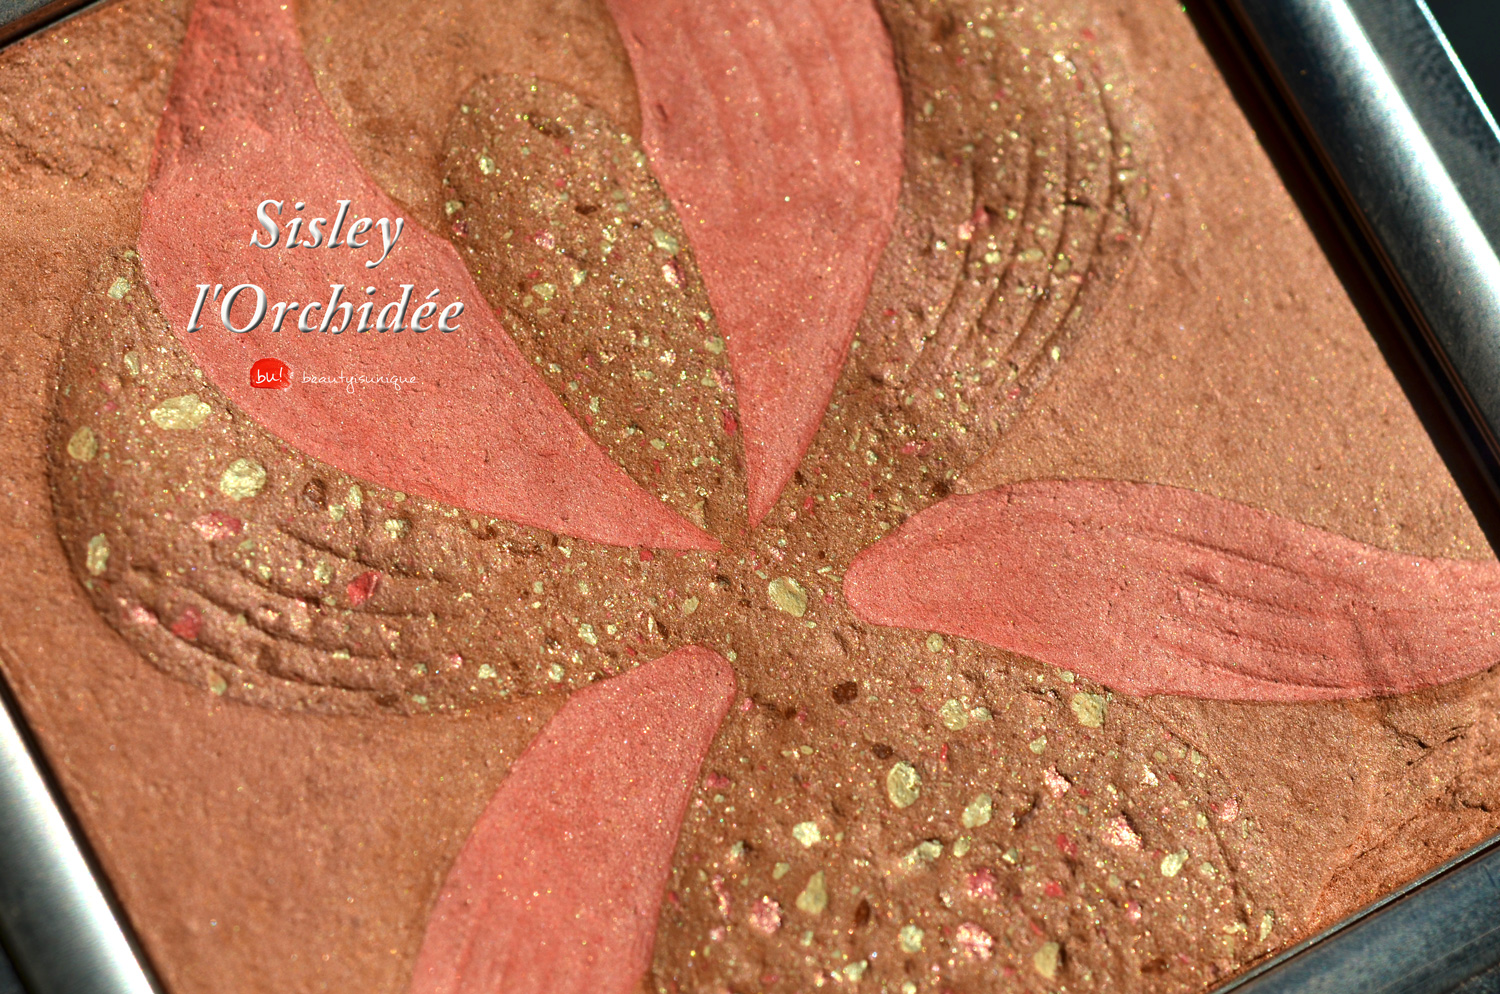 sisley-l'orchidee-swatches